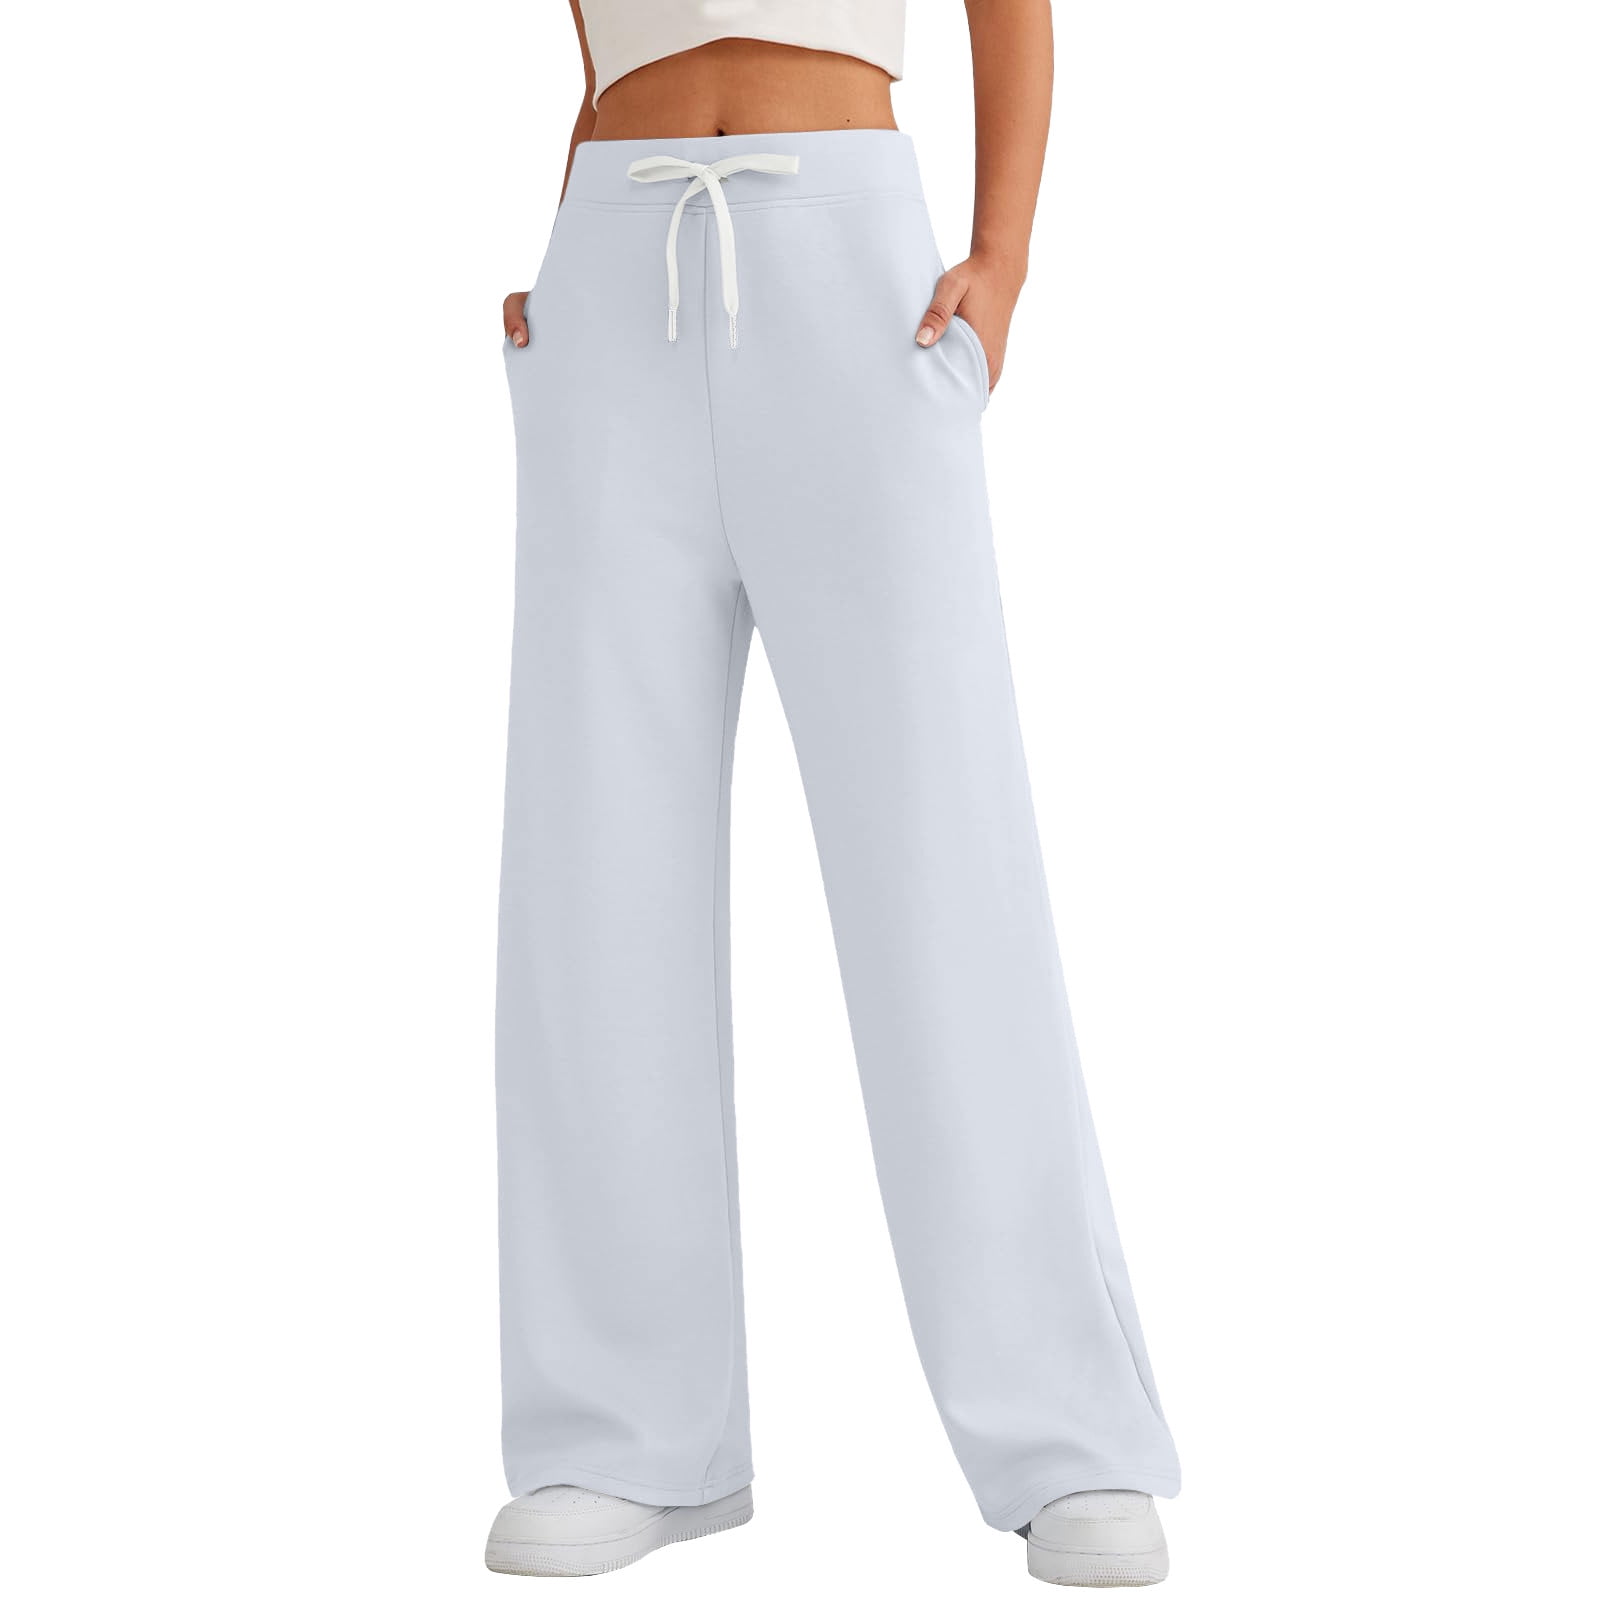 TQWQT Women's Plus Size Wide Leg Sweatpants 2023 Fall Casual Trendy  Trending Tall High Wasited Elastic Waist Jogger Sweat Pants with Pockets  White S 